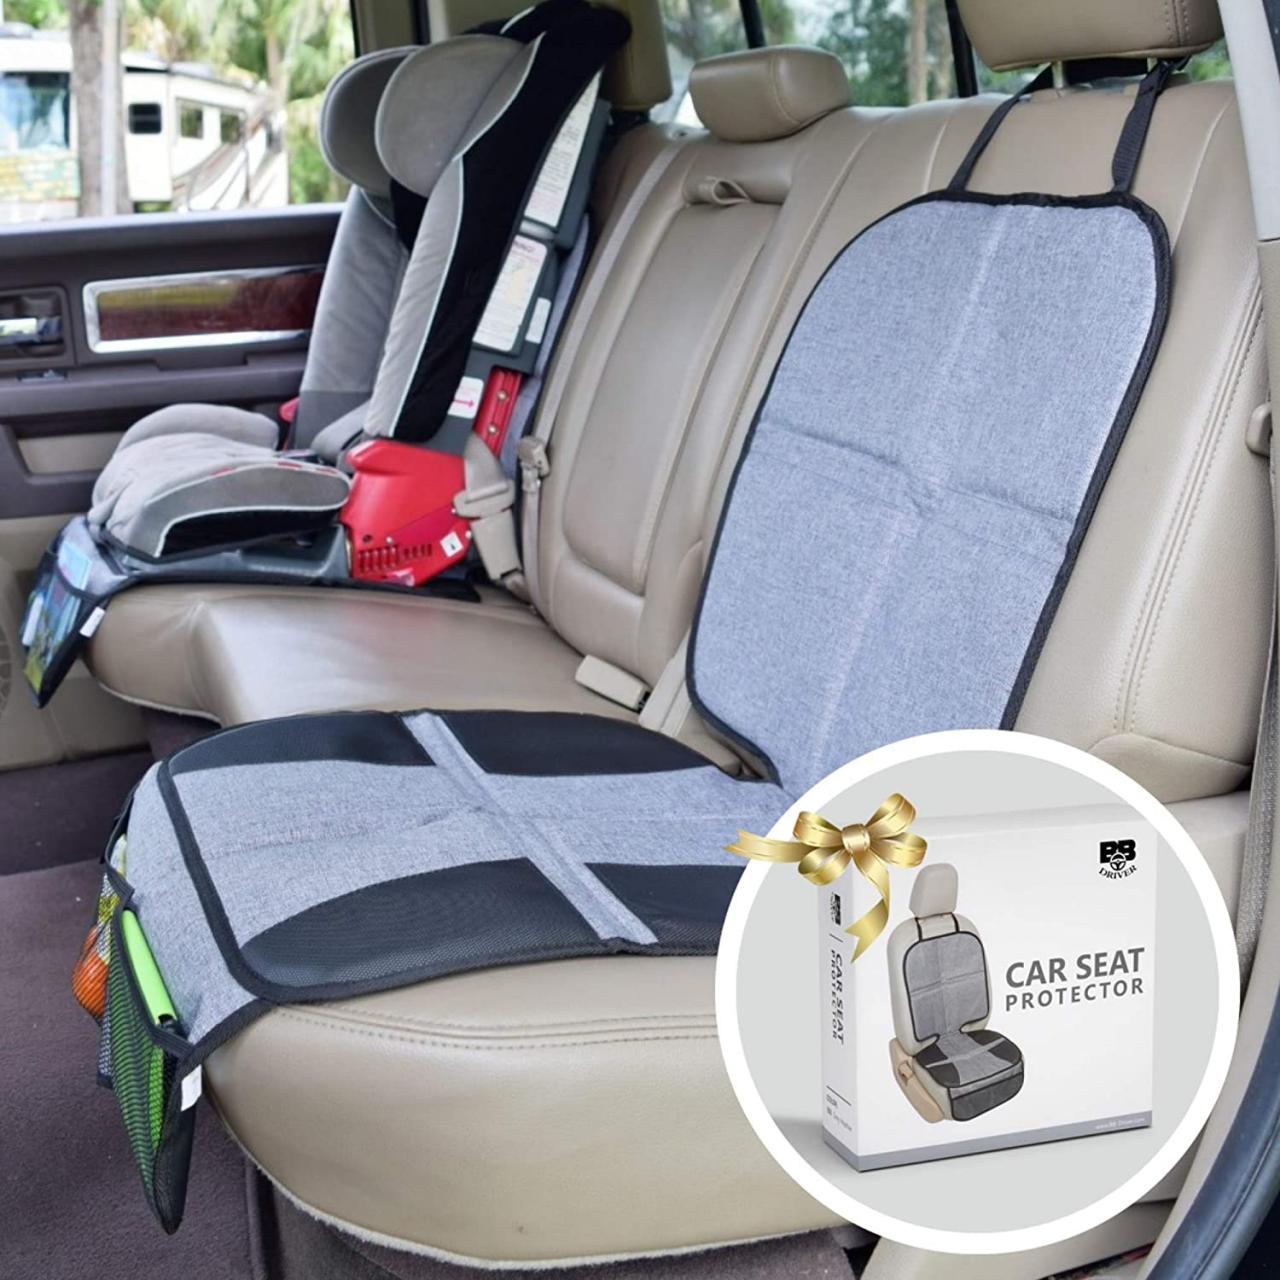 Buy Kick Mats Car Seat Back Protector Organizer with 10.1 Tablet Holder Car  Travel Accessories for Kids Baby Online in Vietnam. B01LYBEISI